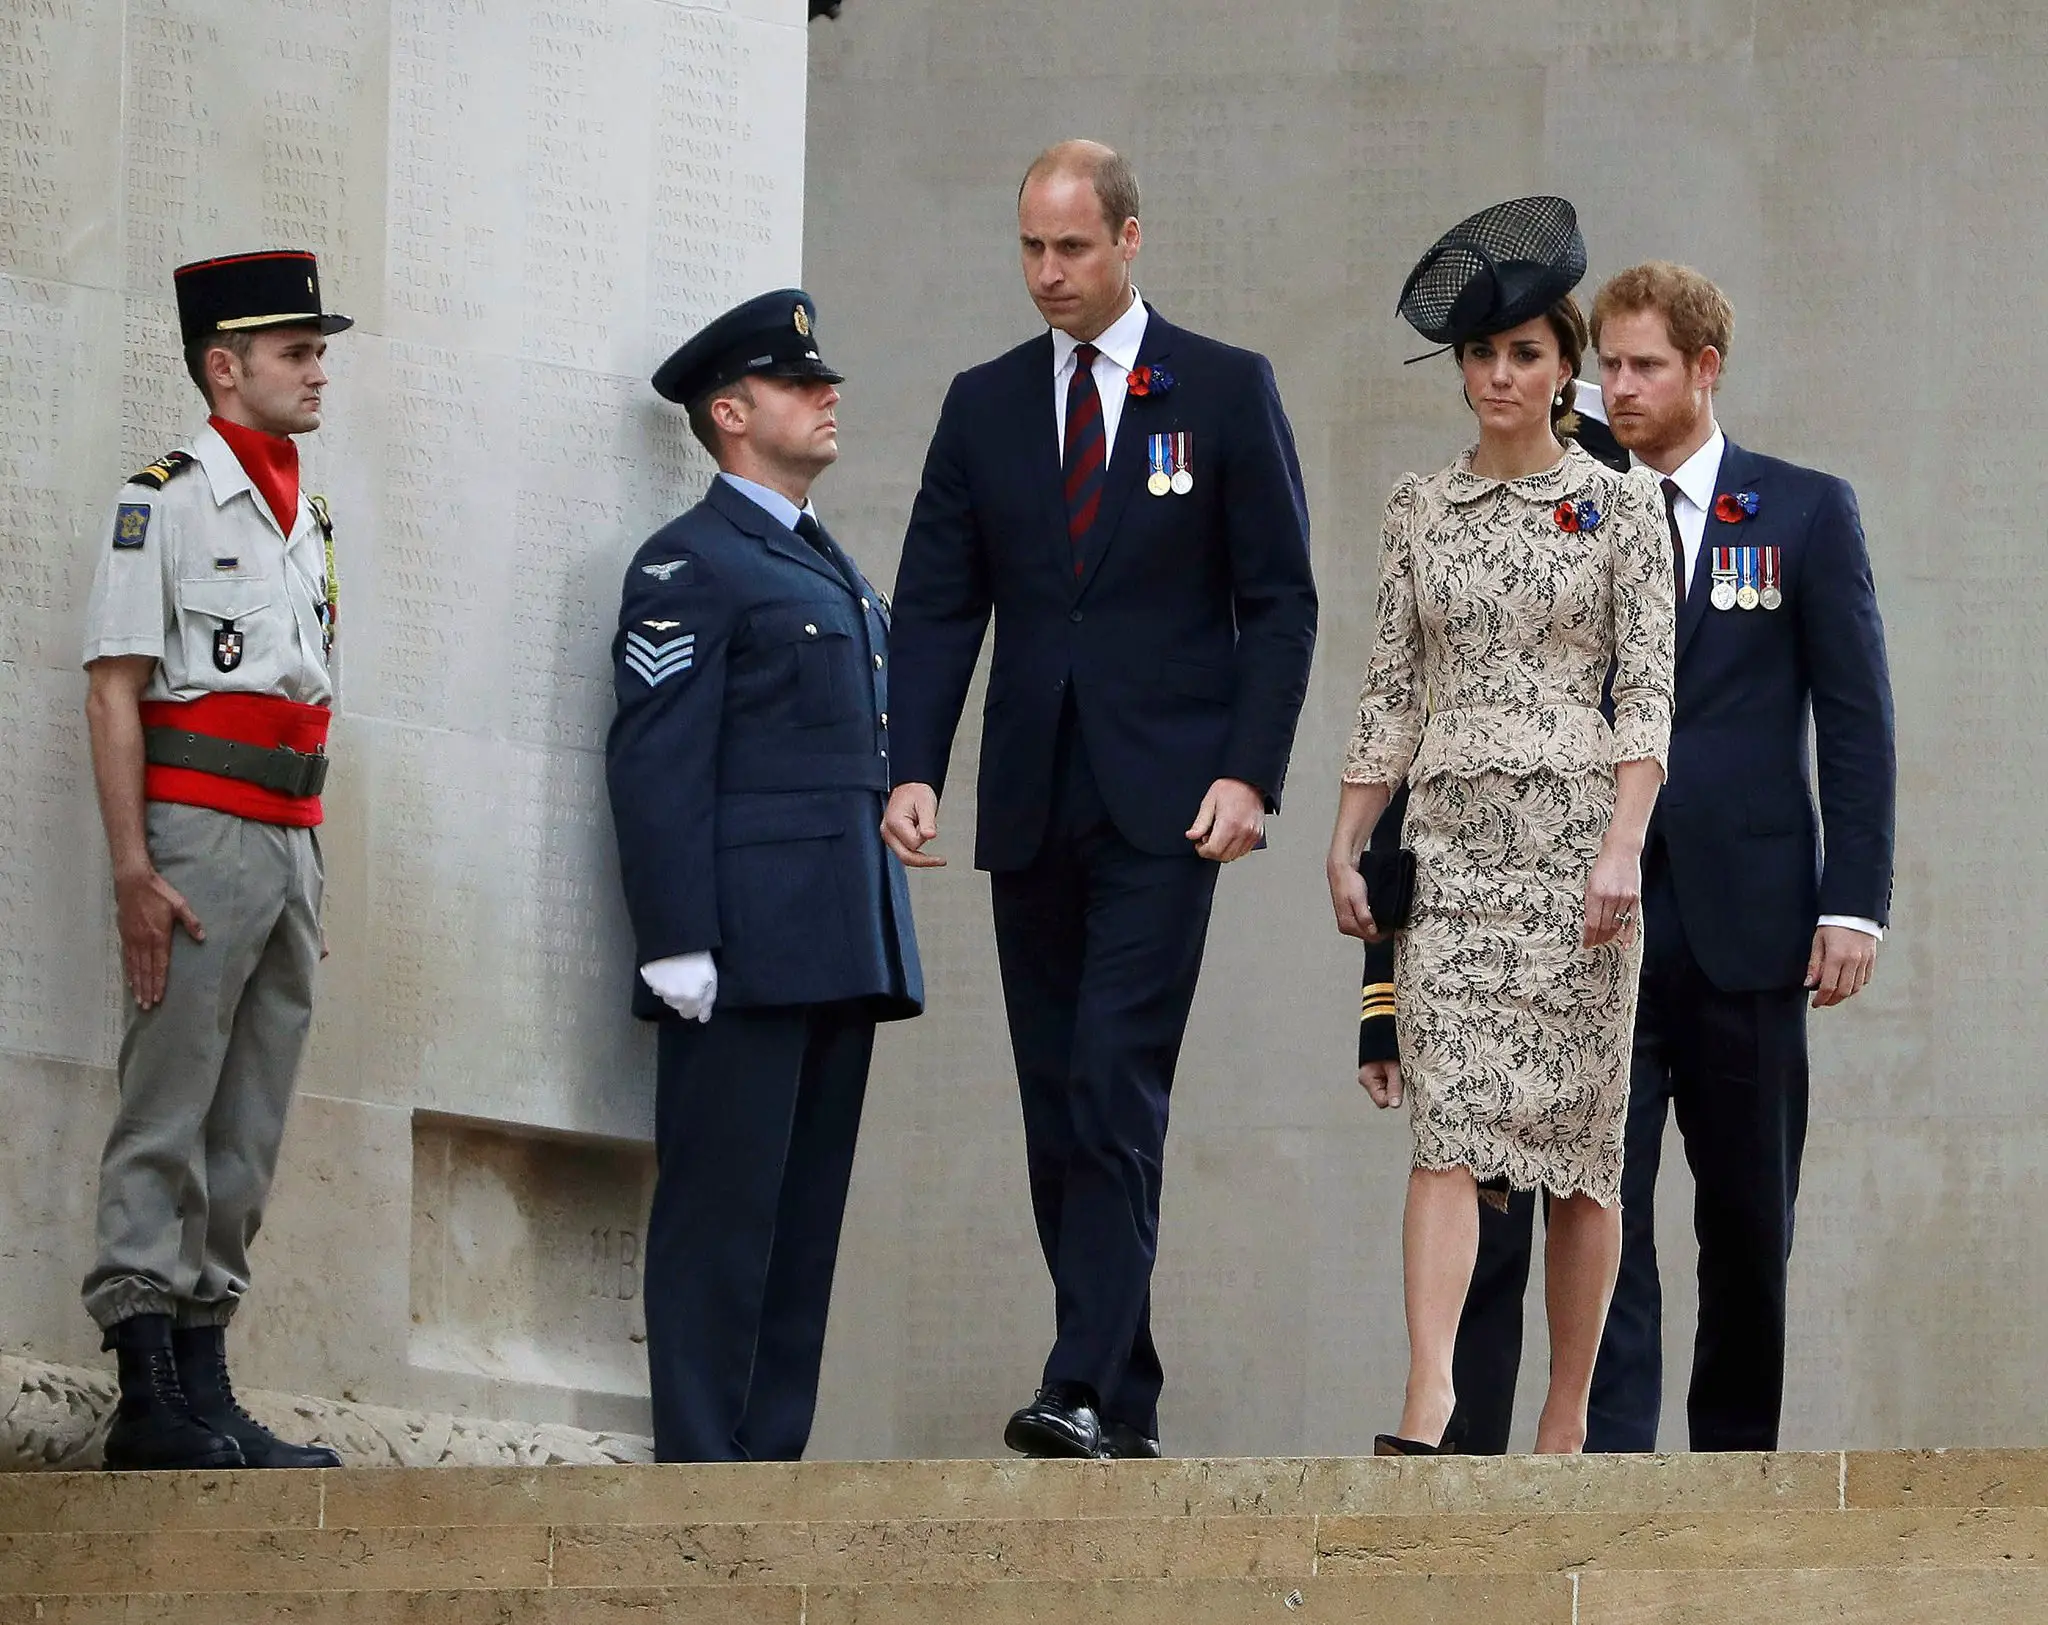 The Duchess of Cambridge wore a bespoke Jenny Packham Lace Sheath Dress when she attended  Commemoration of the Centenary of the Battle of the Somme at The Commonwealth War Graves Commission Thiepval Memorial on July 1, 2016 in Thiepval, France. 